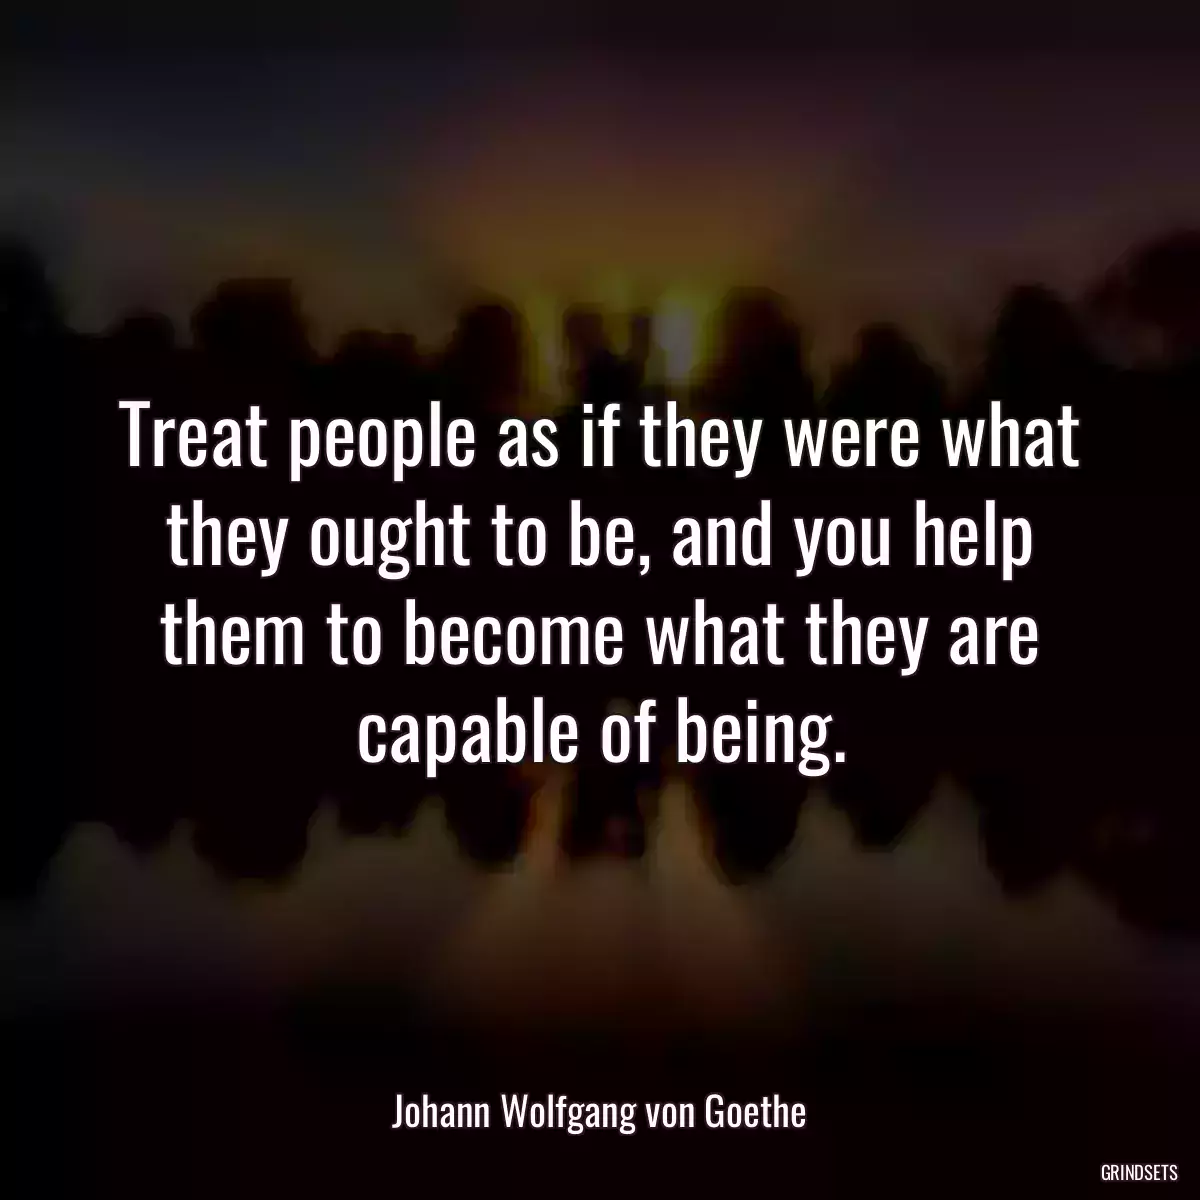 Treat people as if they were what they ought to be, and you help them to become what they are capable of being.